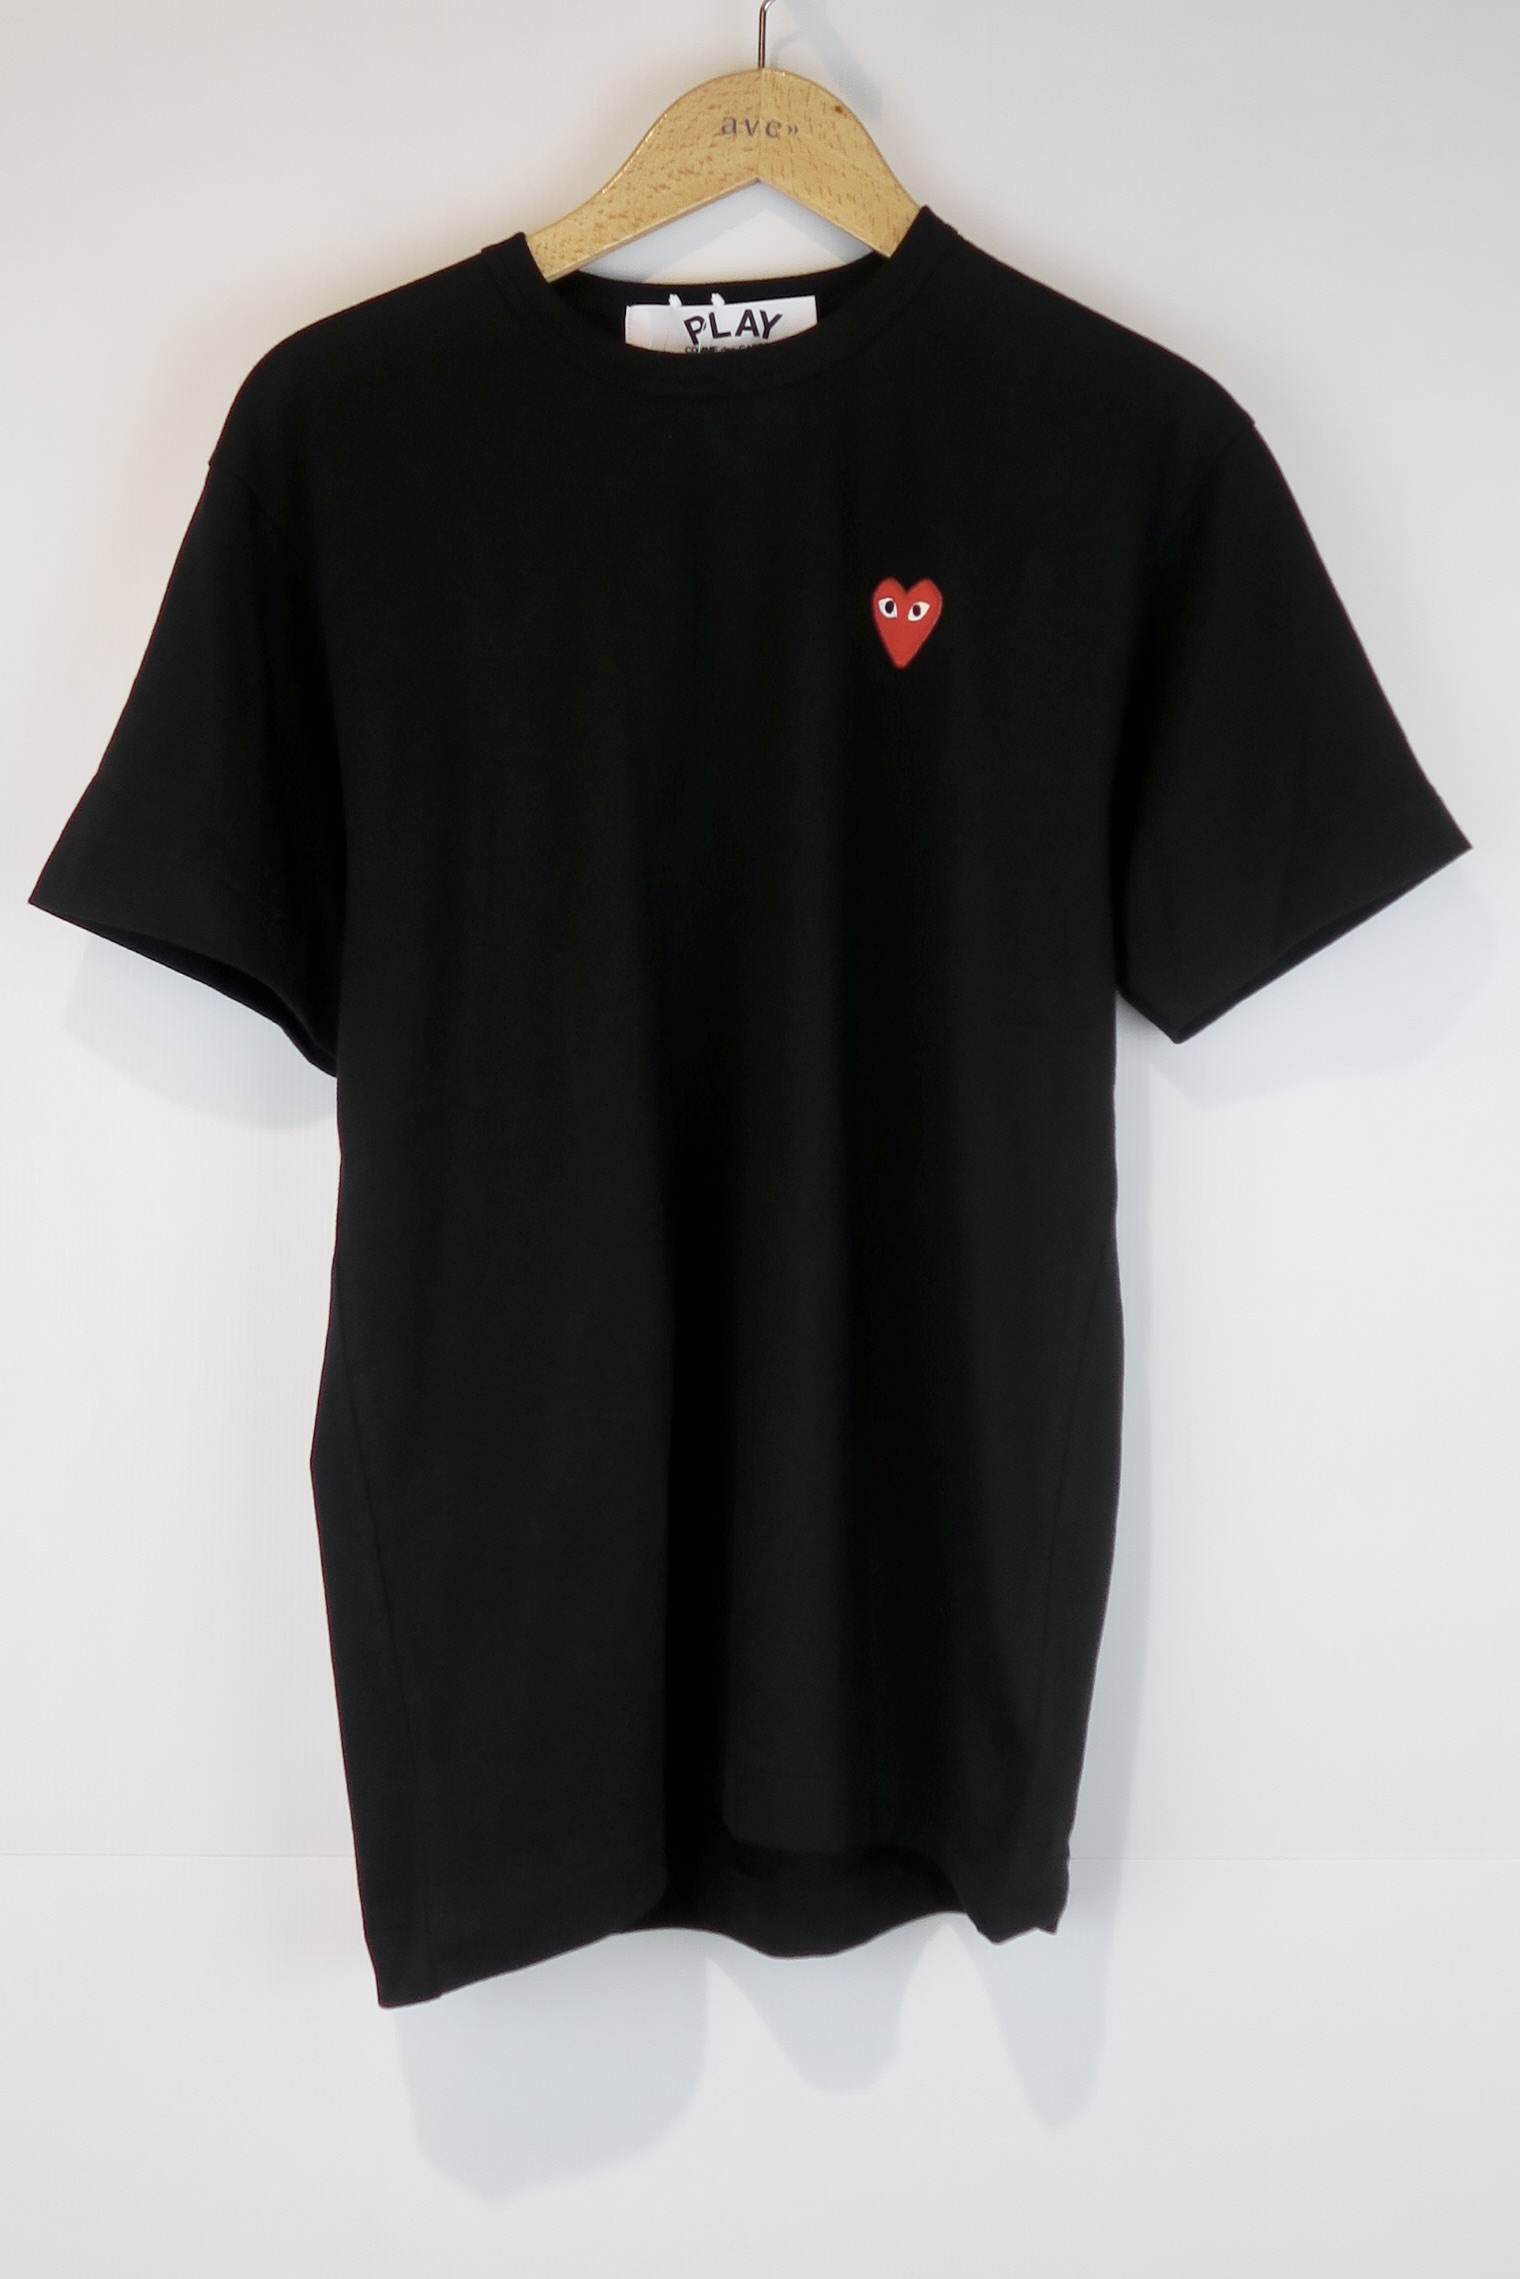 COMME DES GARCONS PLAY AX-T108 play t-shirt red heart black - ave ...